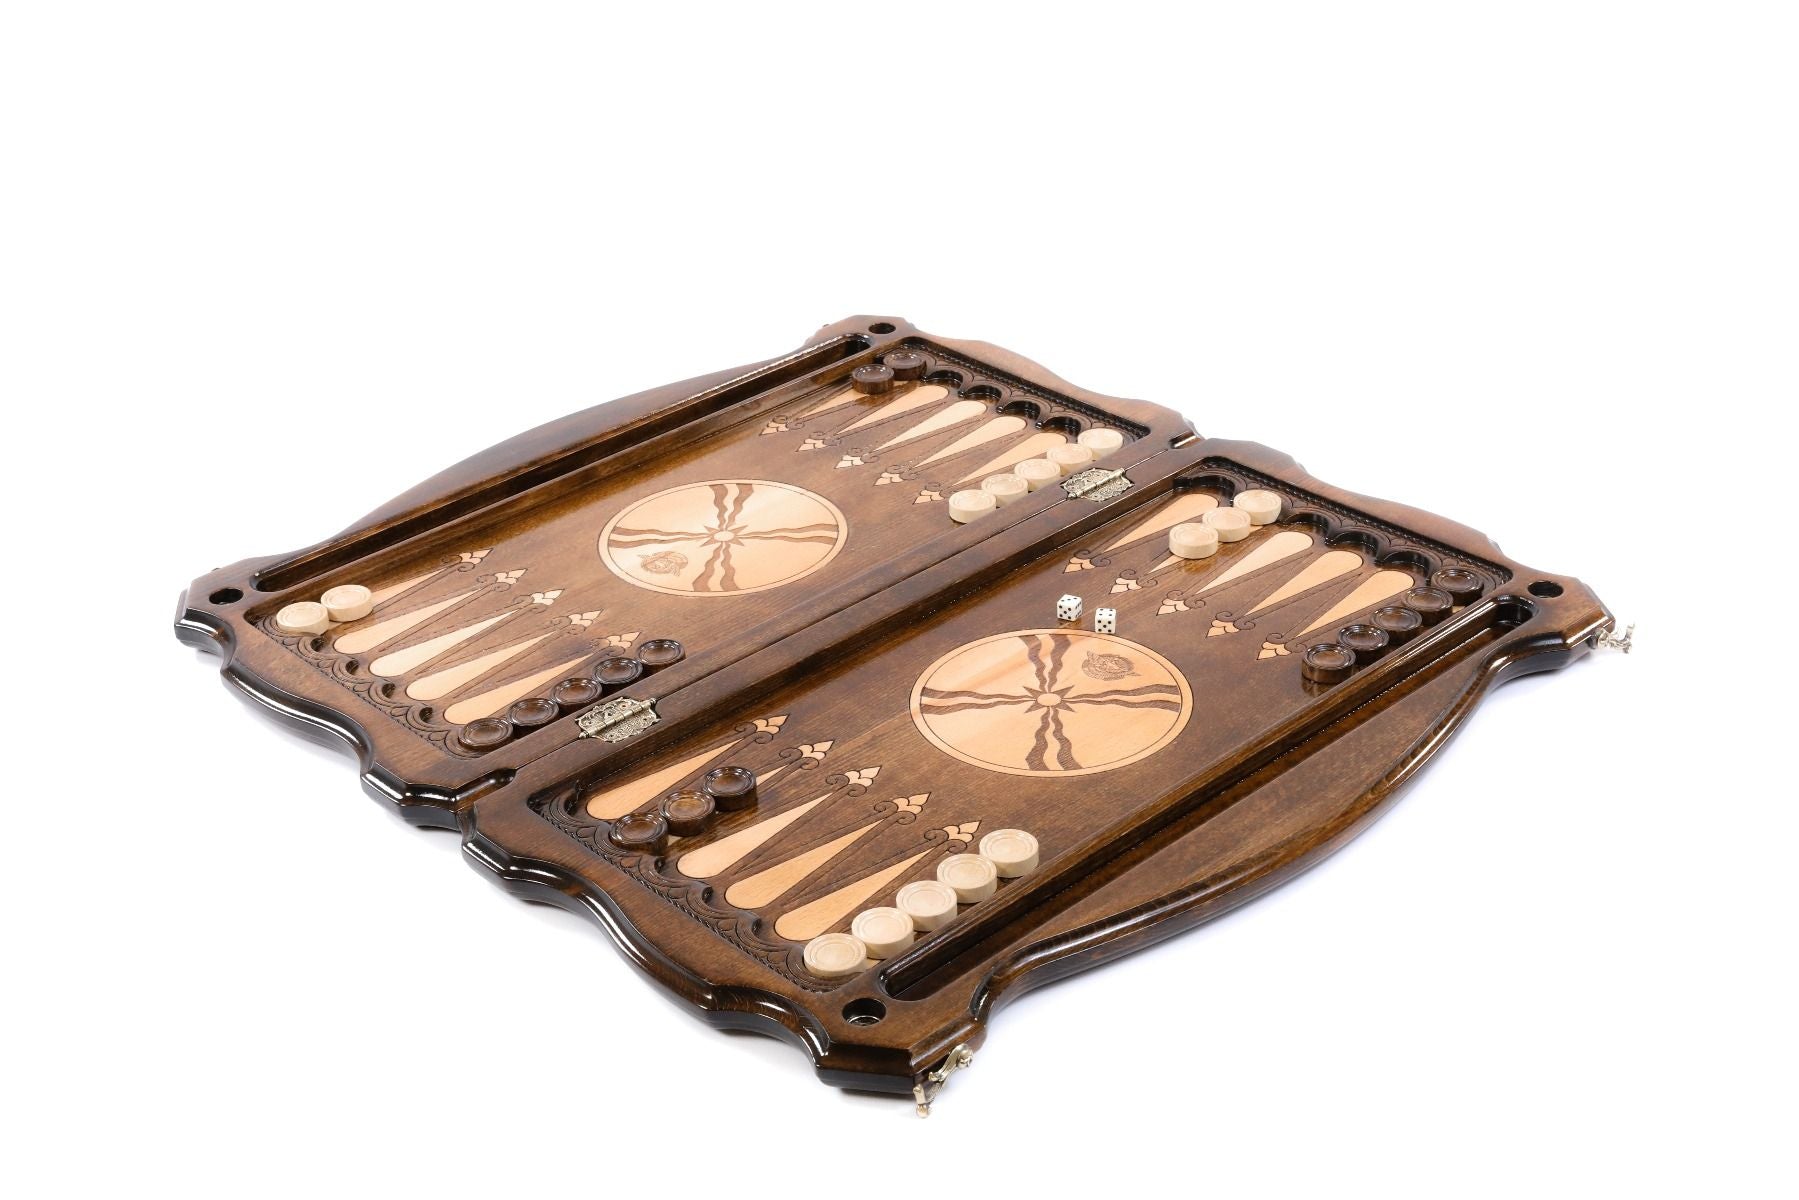 Immerse in the legacy of Assyria with a backgammon set that brings ancient symbols to life.